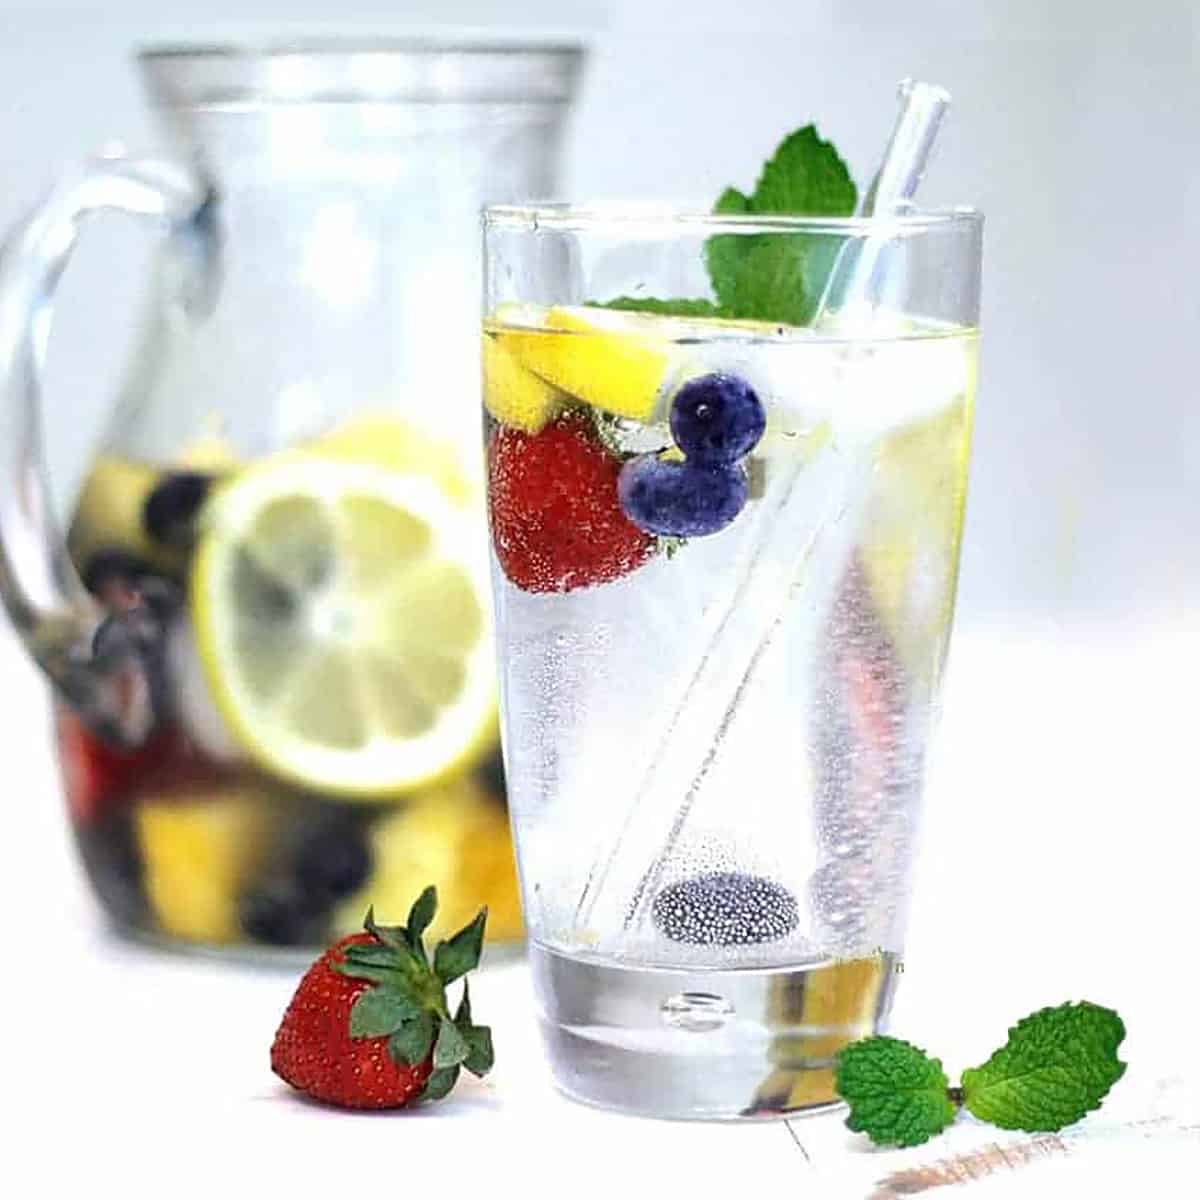 https://greensmoothiegourmet.com/wp-content/uploads/2018/05/sparkling-water-infused-water.jpg